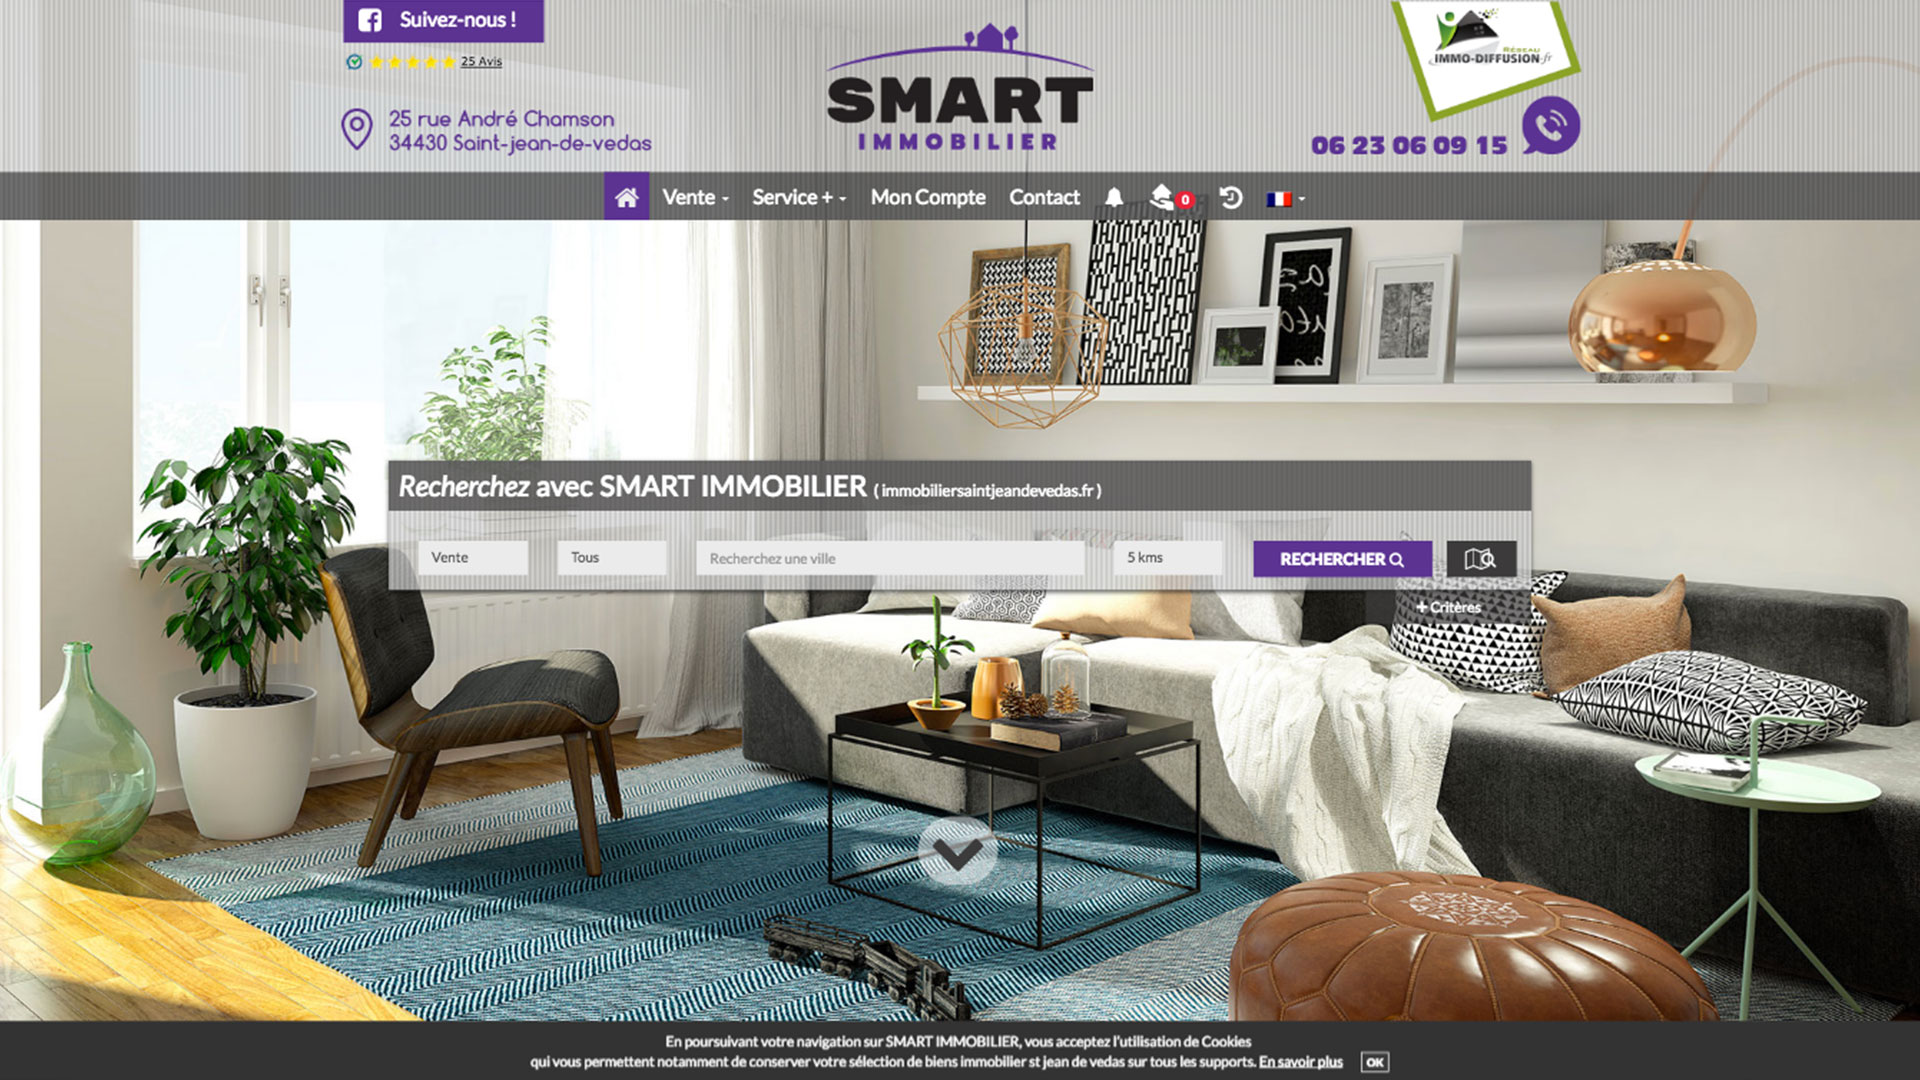 SMART IMMOBILIER